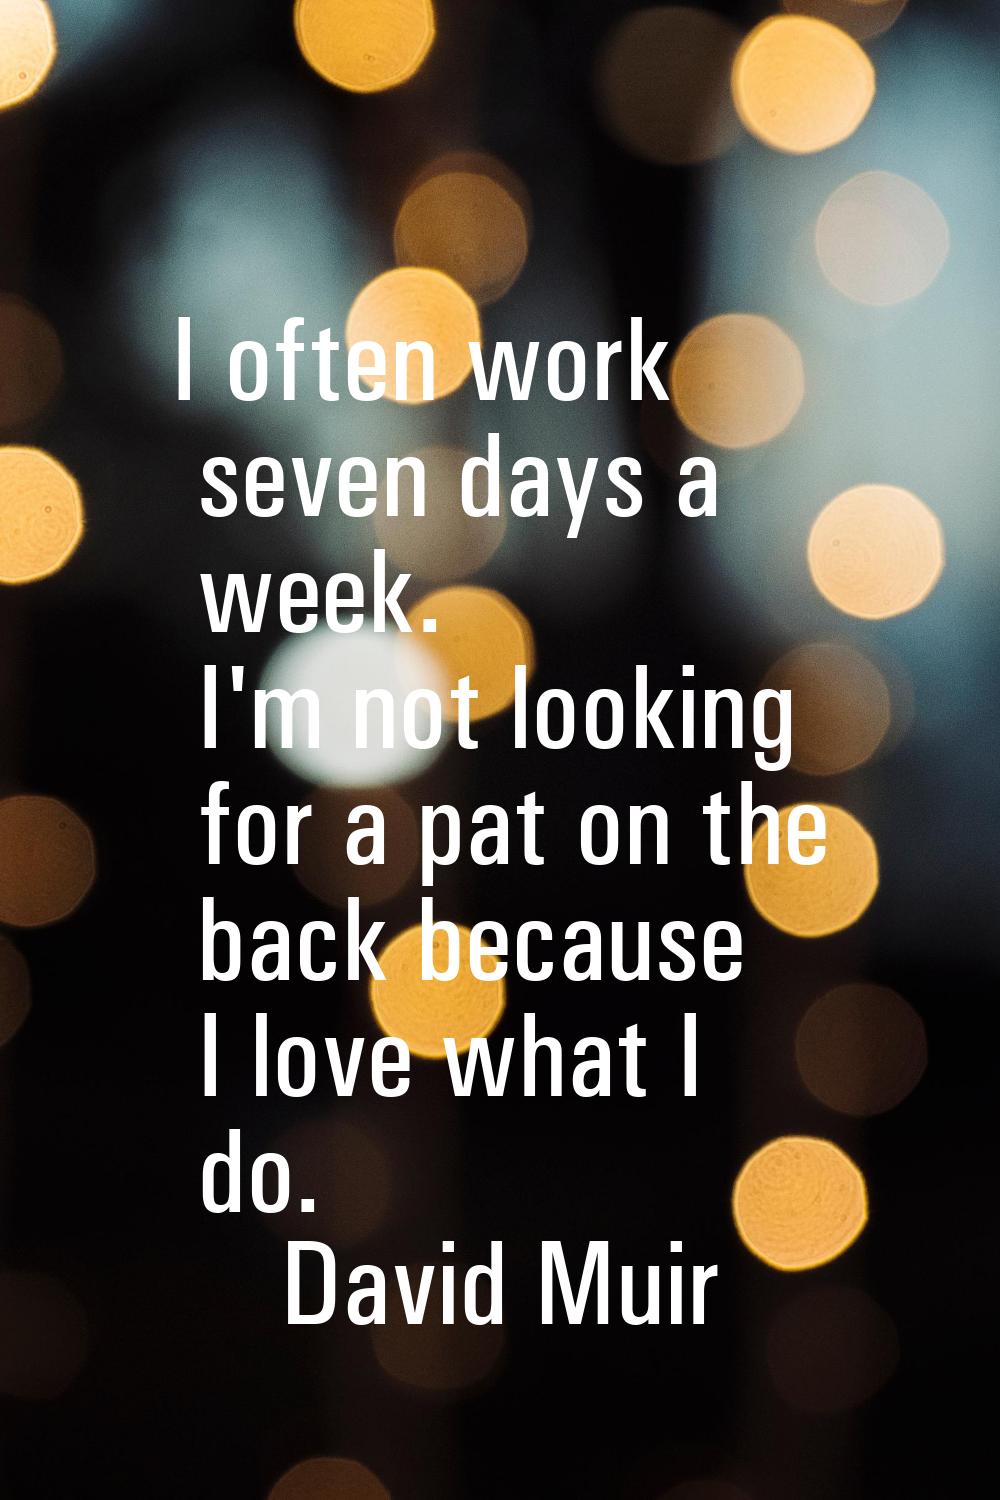 I often work seven days a week. I'm not looking for a pat on the back because I love what I do.